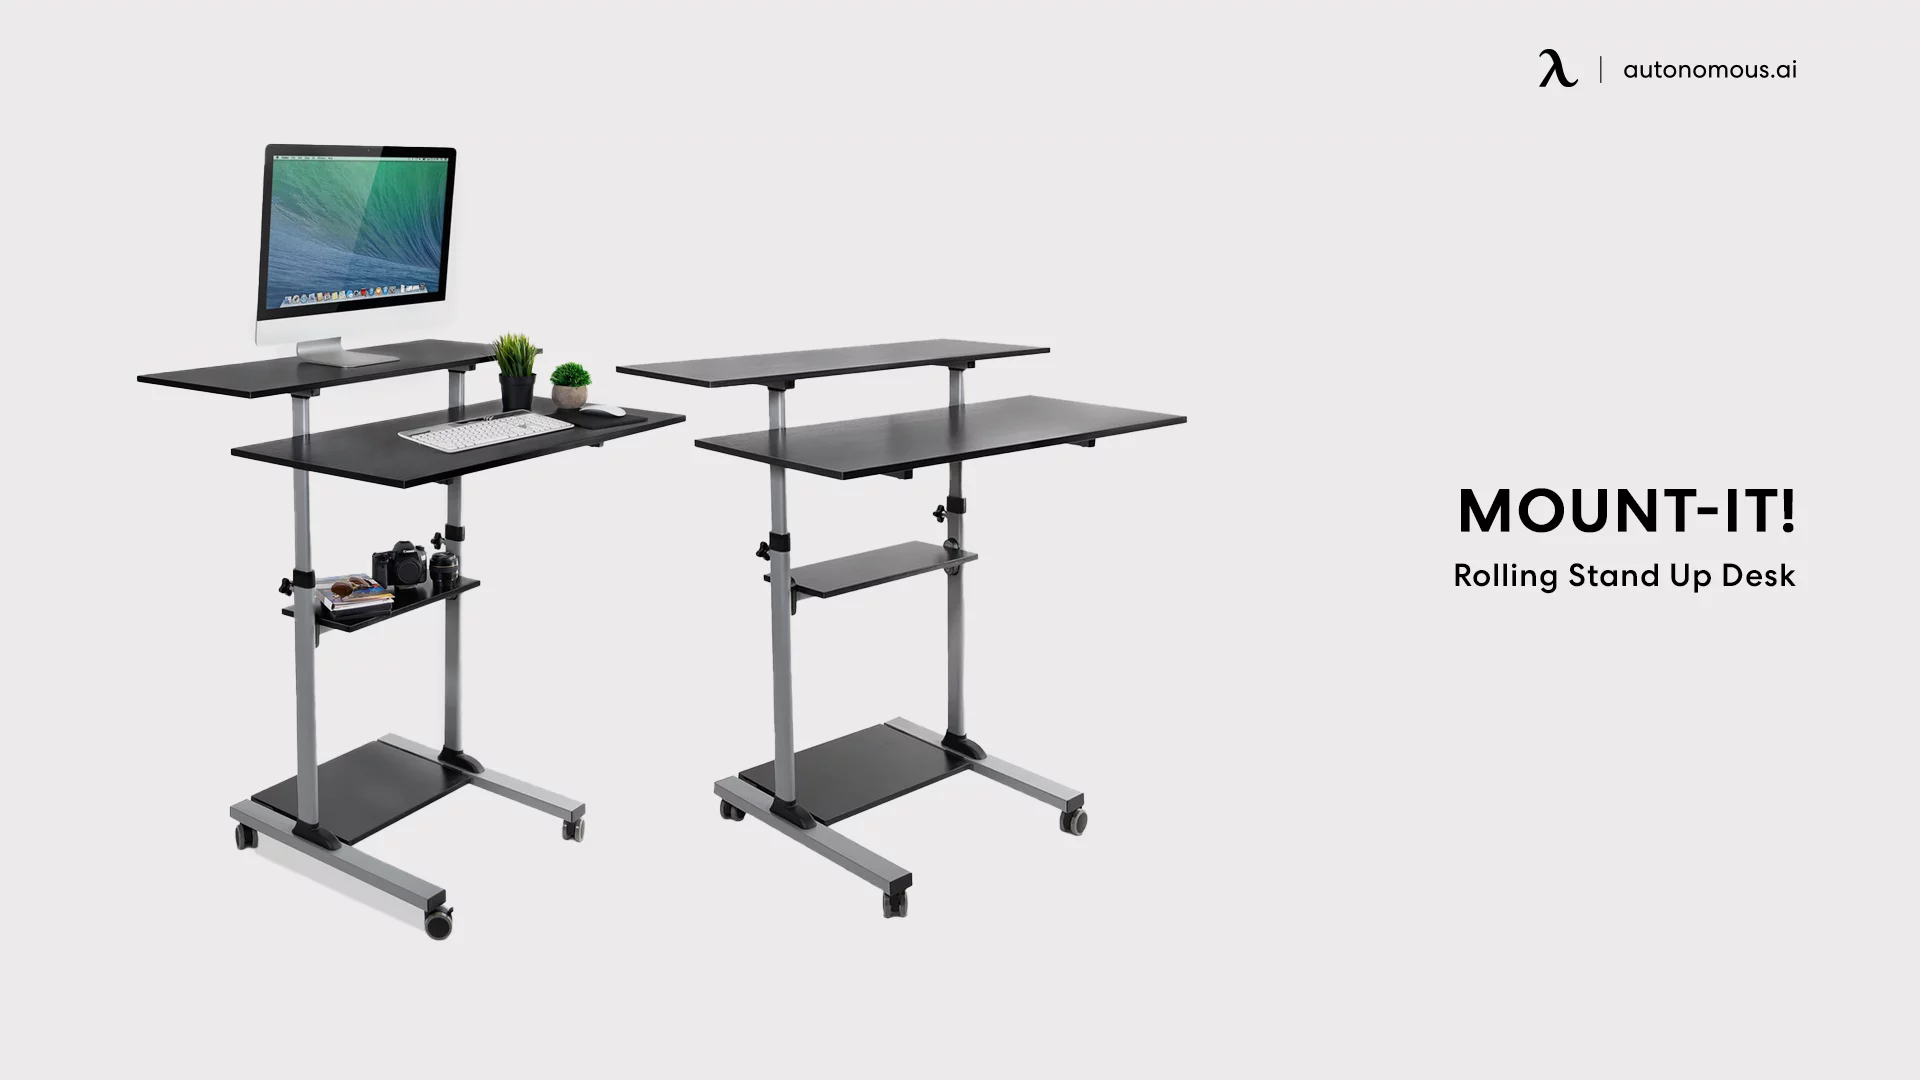 Rolling Stand Up Desk by Mount-It!